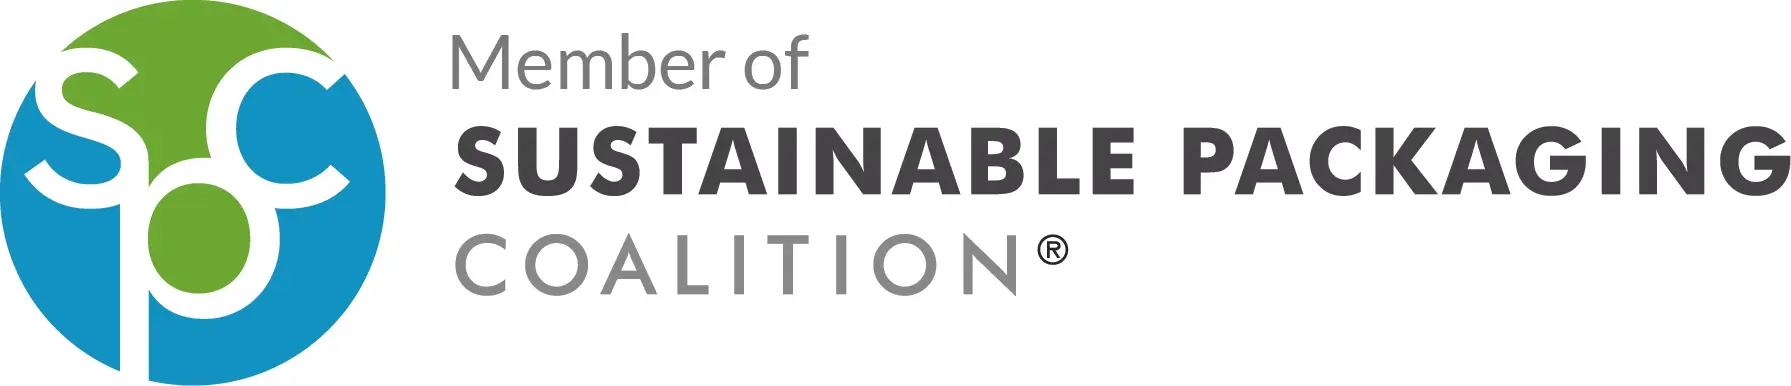 Member of Sustainable Packaging Coalition